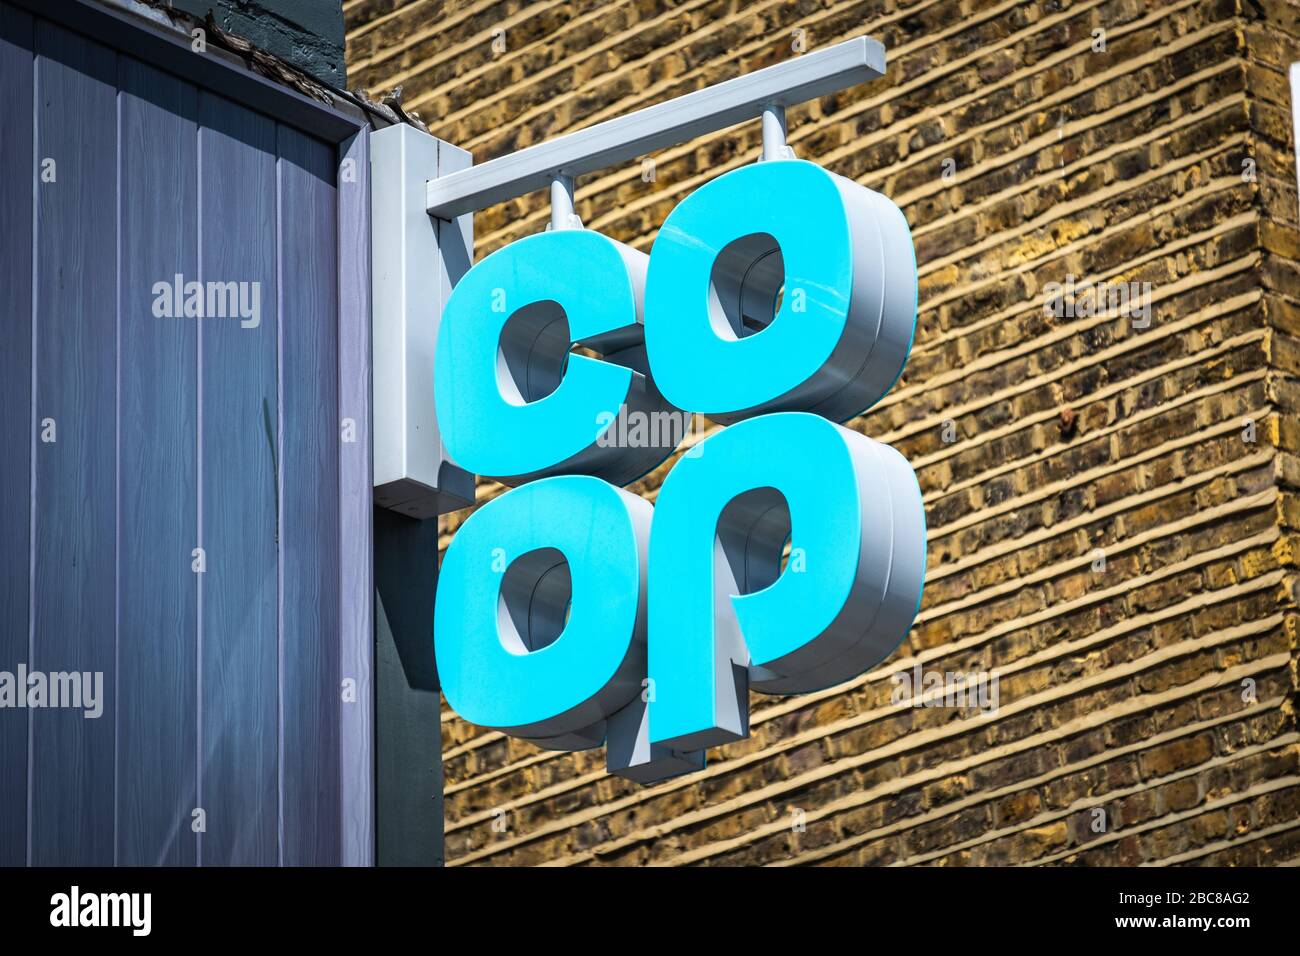 Co-op food store- local version of British supermarket chain- exterior logo / signage- London Stock Photo